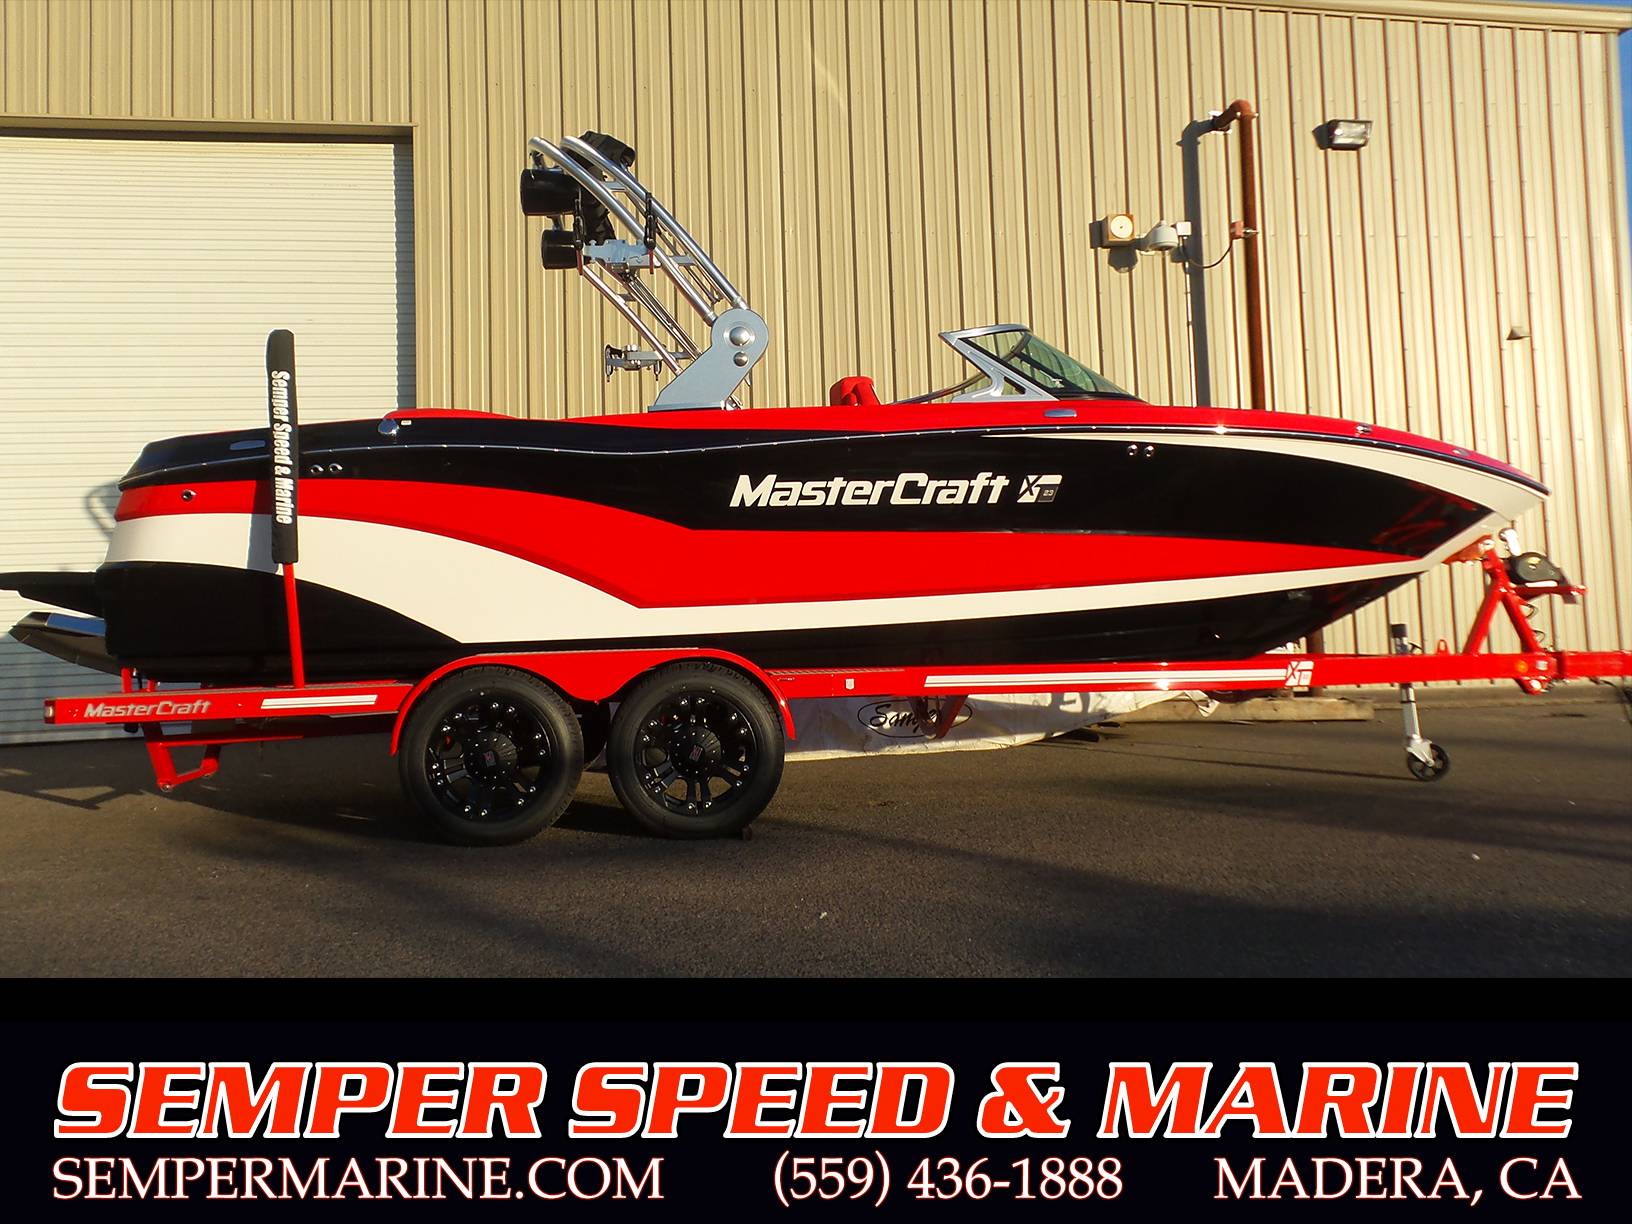 Red White Boat Logo - 2018 Mastercraft XT23 RED/BLACK/WHITE Power Boats Inboard Madera ...